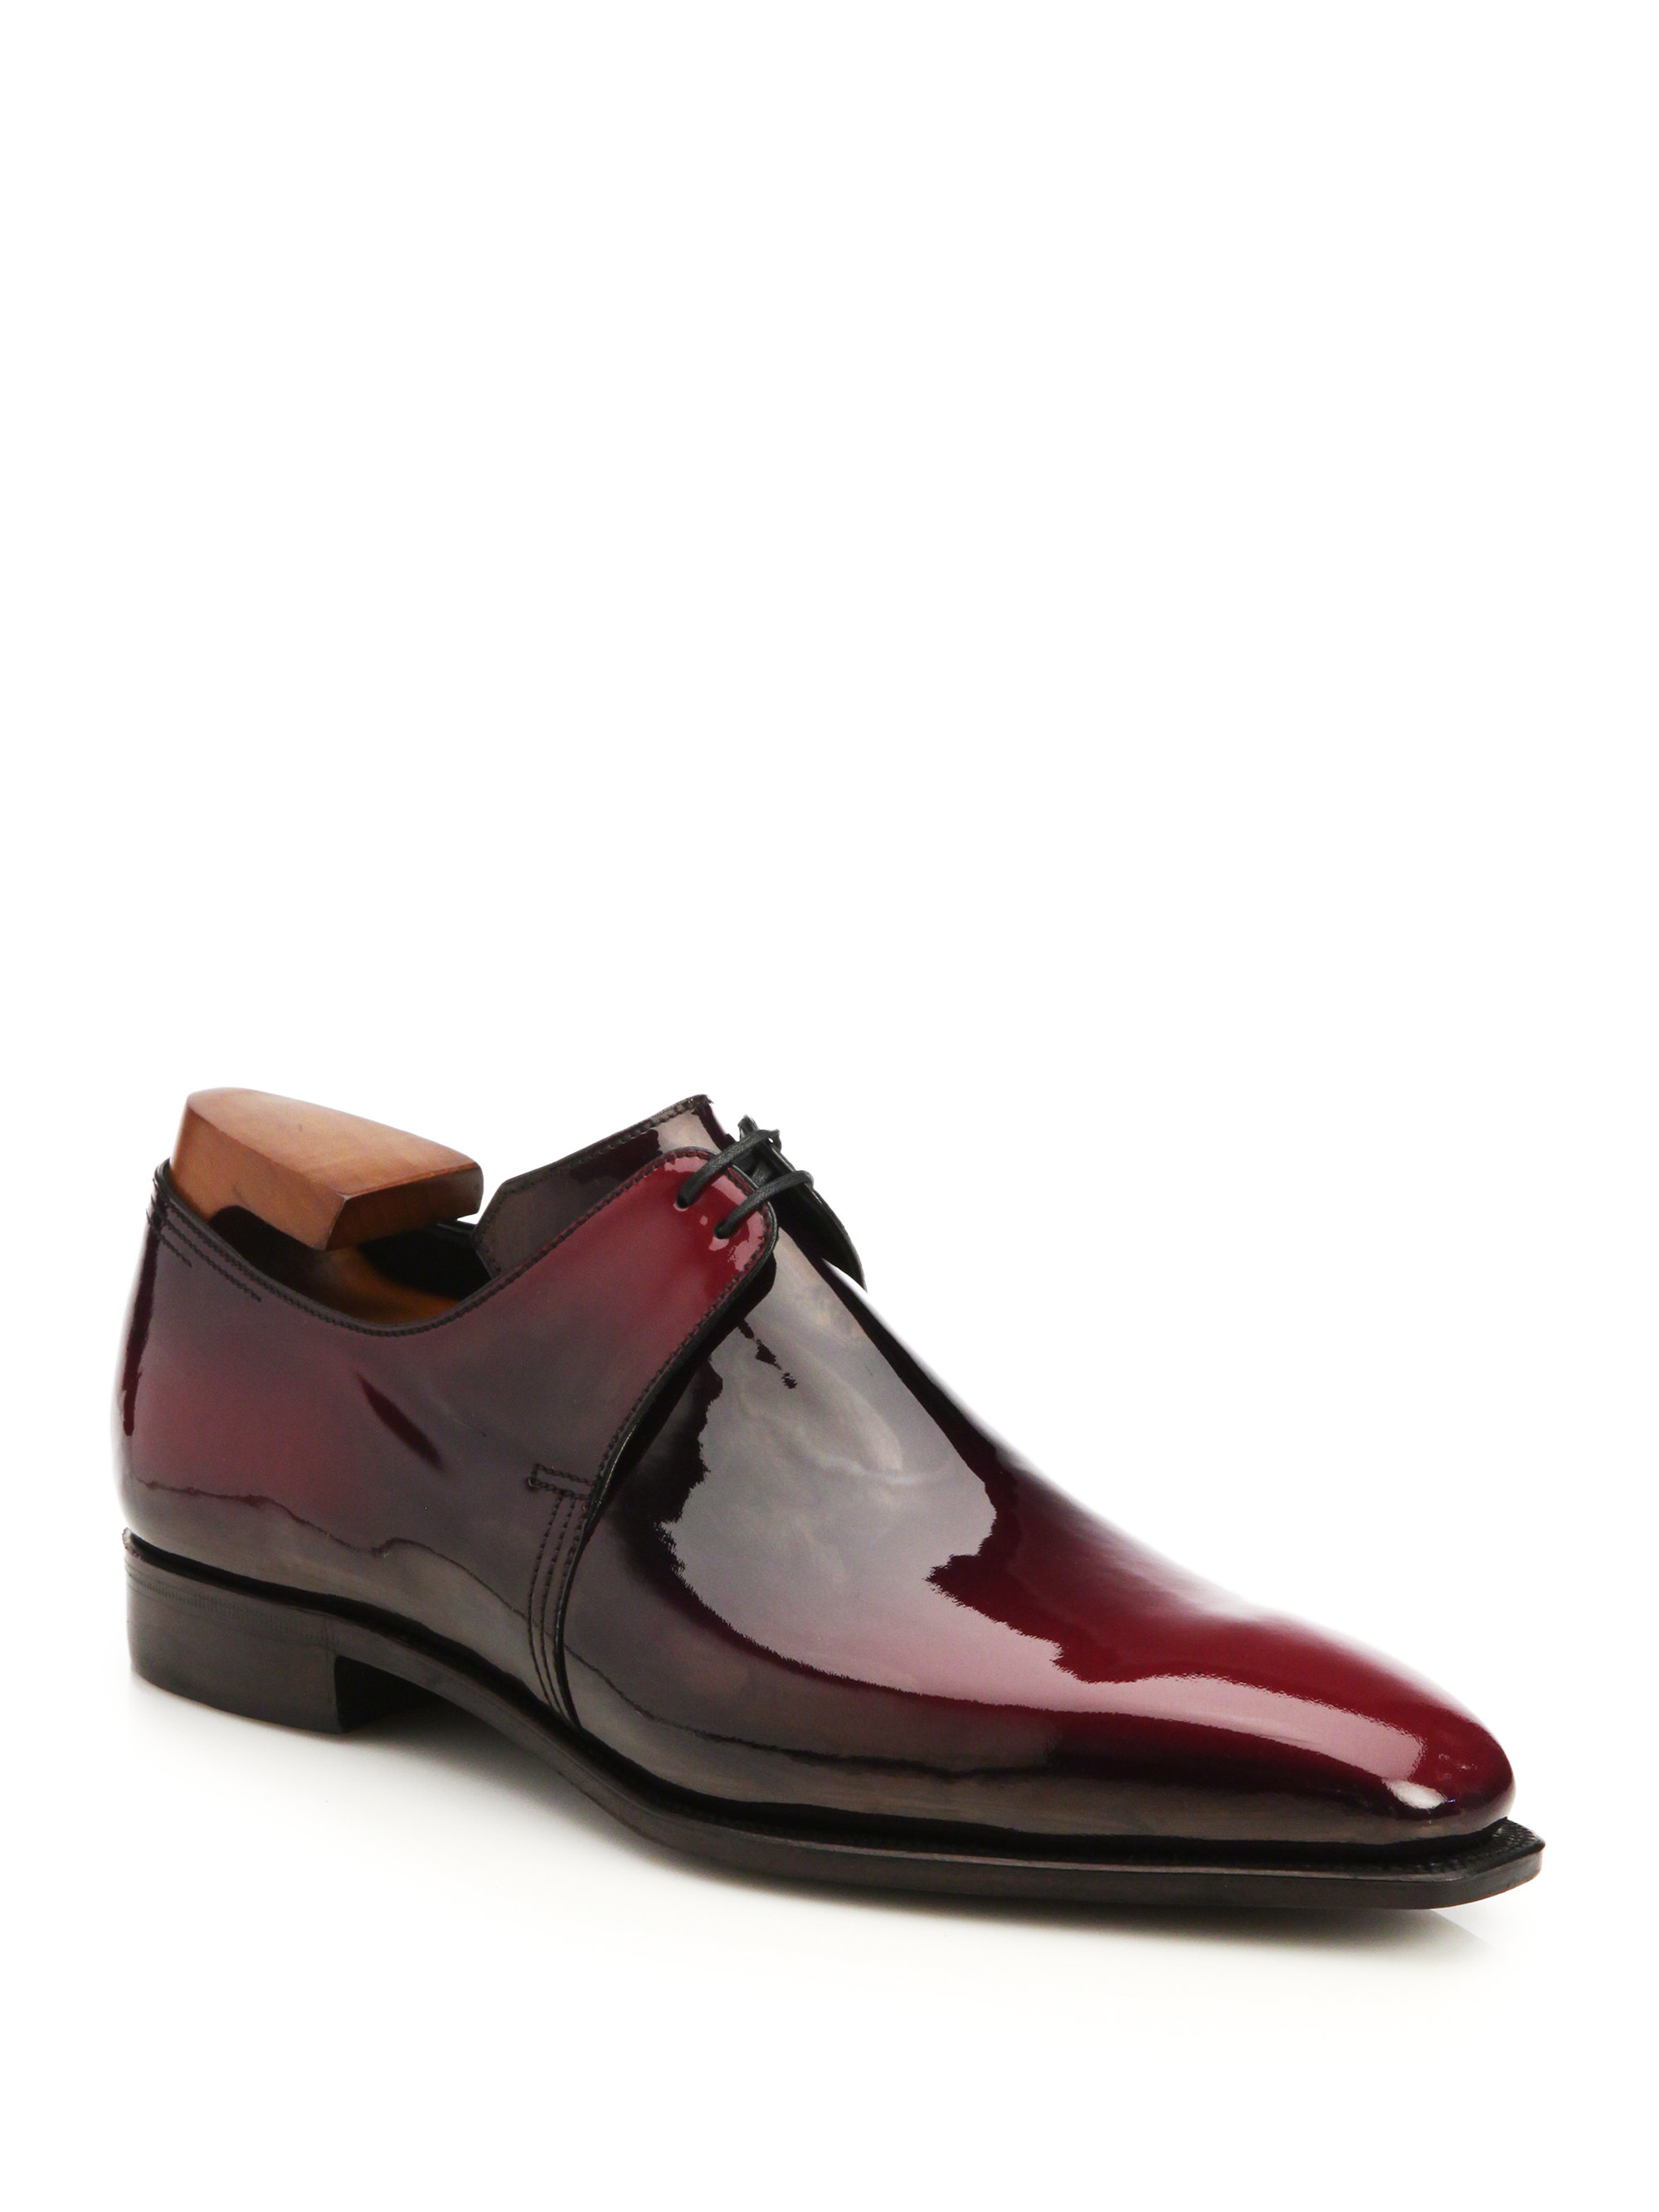 Lyst - Corthay Arca Patent Leather Derby Shoes in Red for Men